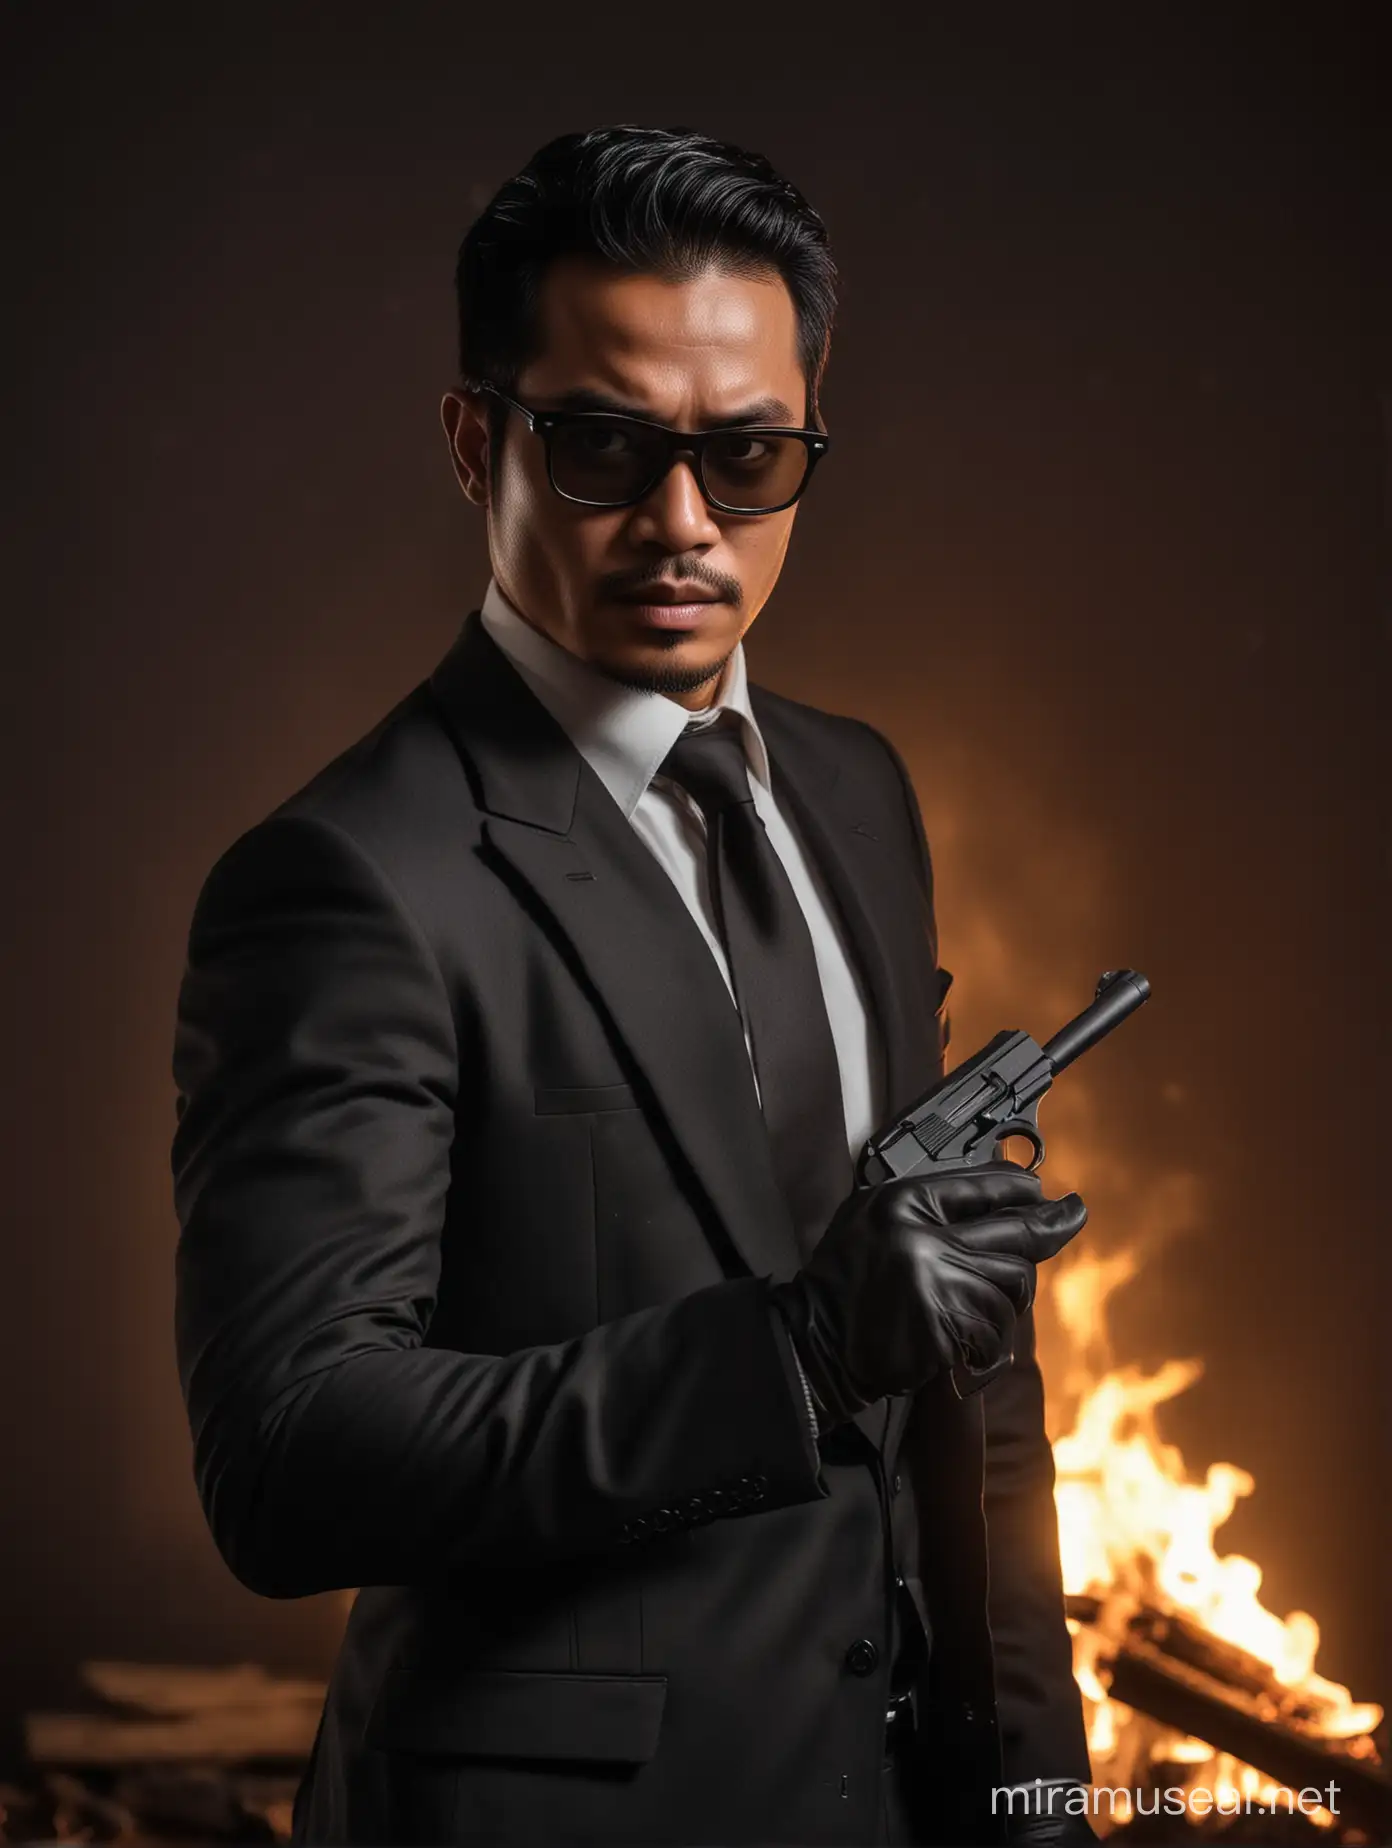 Stealthy Indonesian Secret Agent Amidst Fiery Midnight Scene